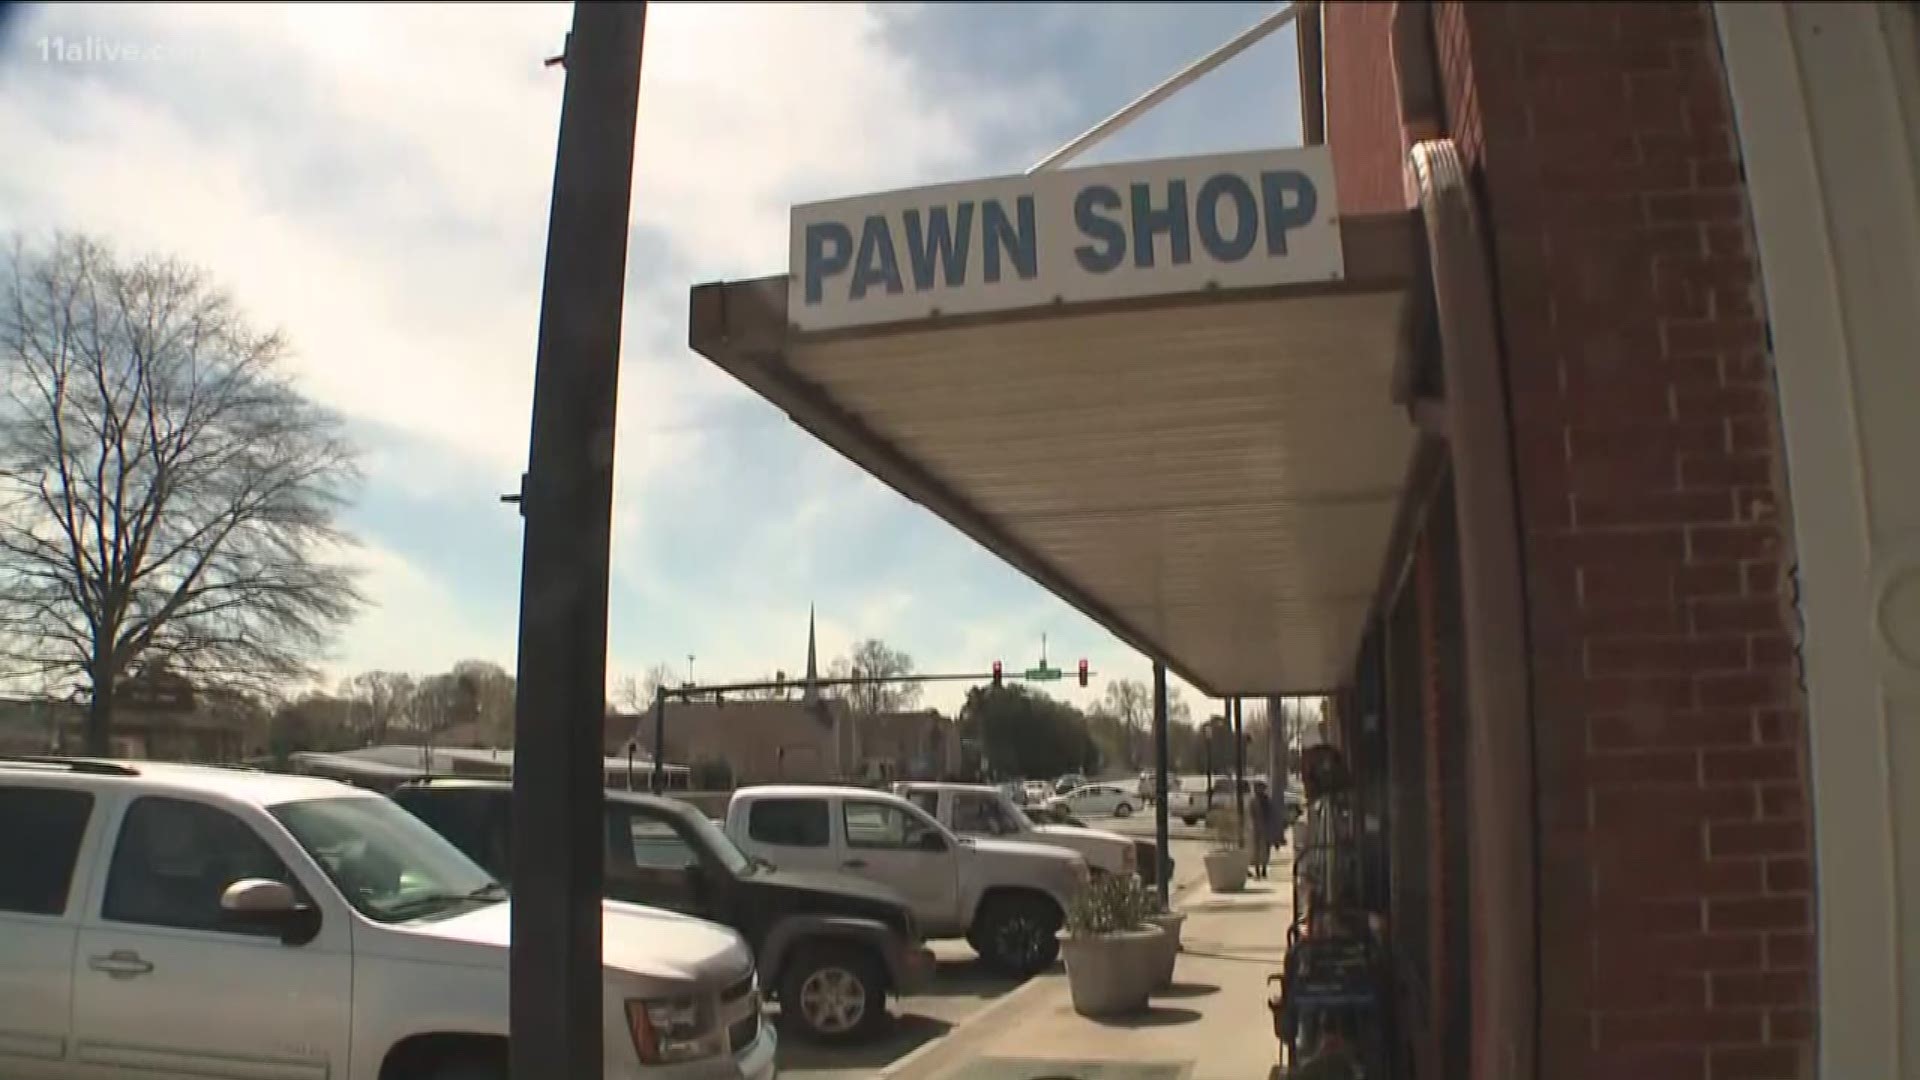 A five-year-old boy was taken from outside of a pawn shop Monday morning in what police are calling a car theft and kidnapping. It happened at Fairburn Pawn on Broad Street in downtown.